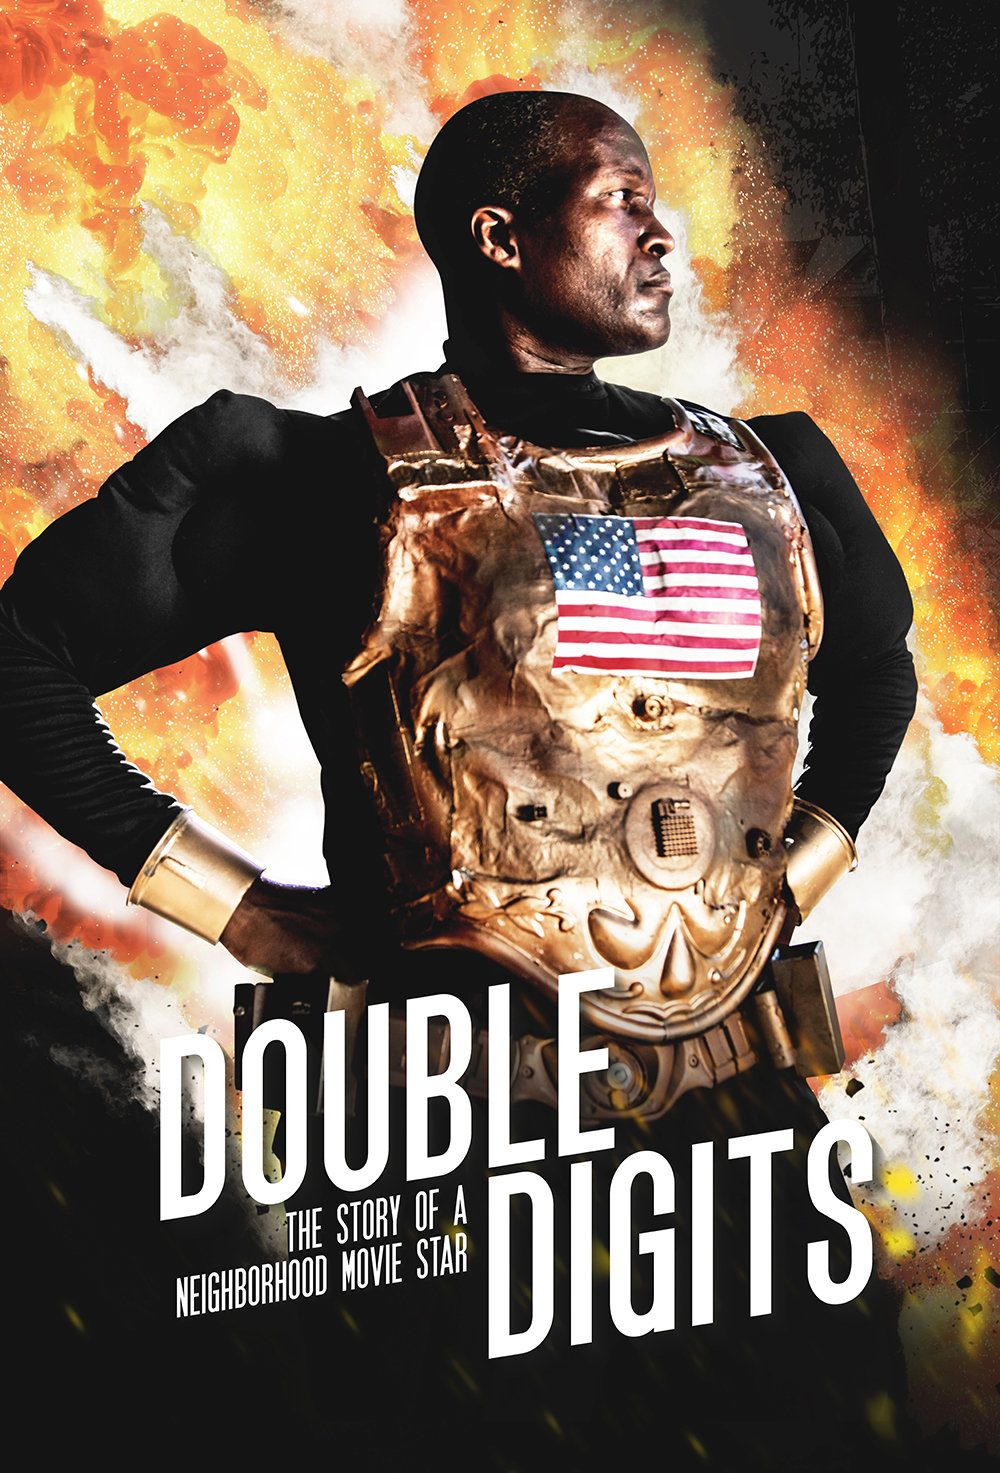 Double Digits: The Story of a Neighborhood Movie Star (2015) starring N/A on DVD on DVD